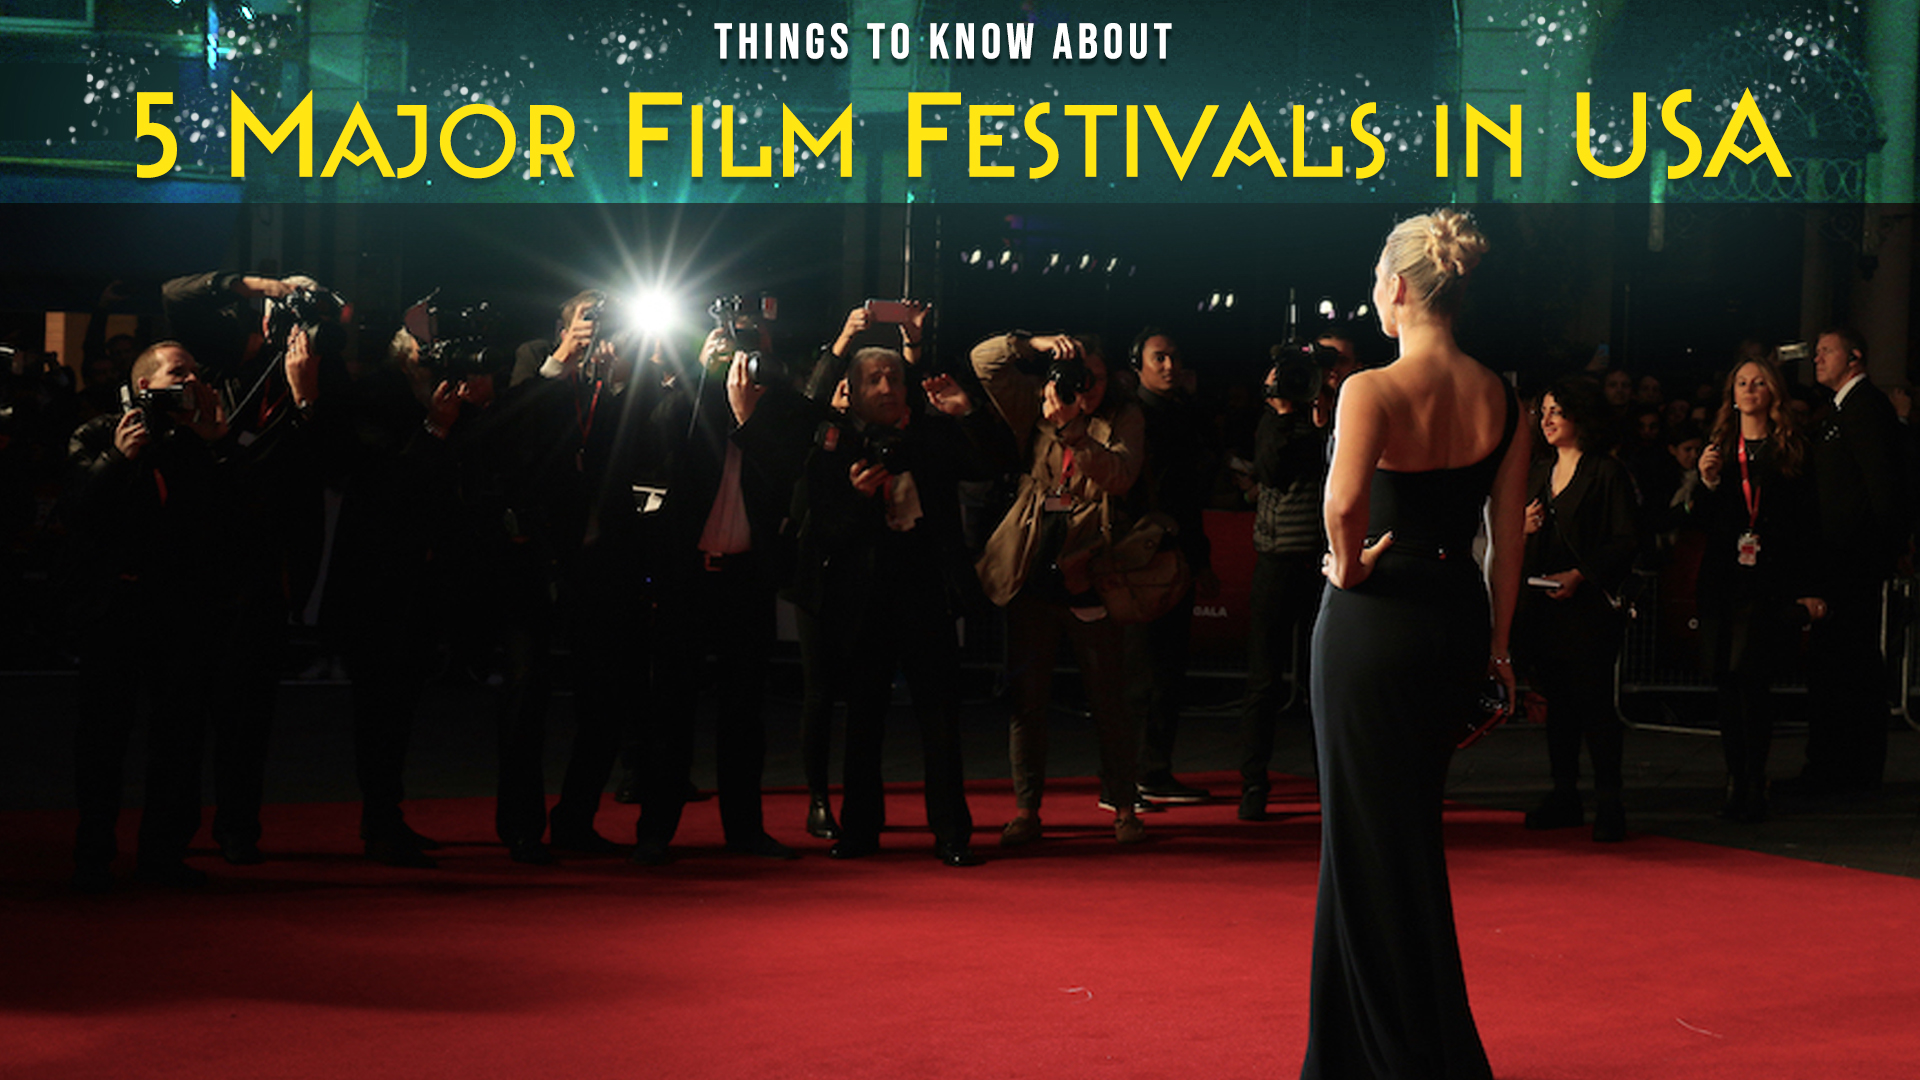 Things to Know About 5 Major Film Festivals in USA